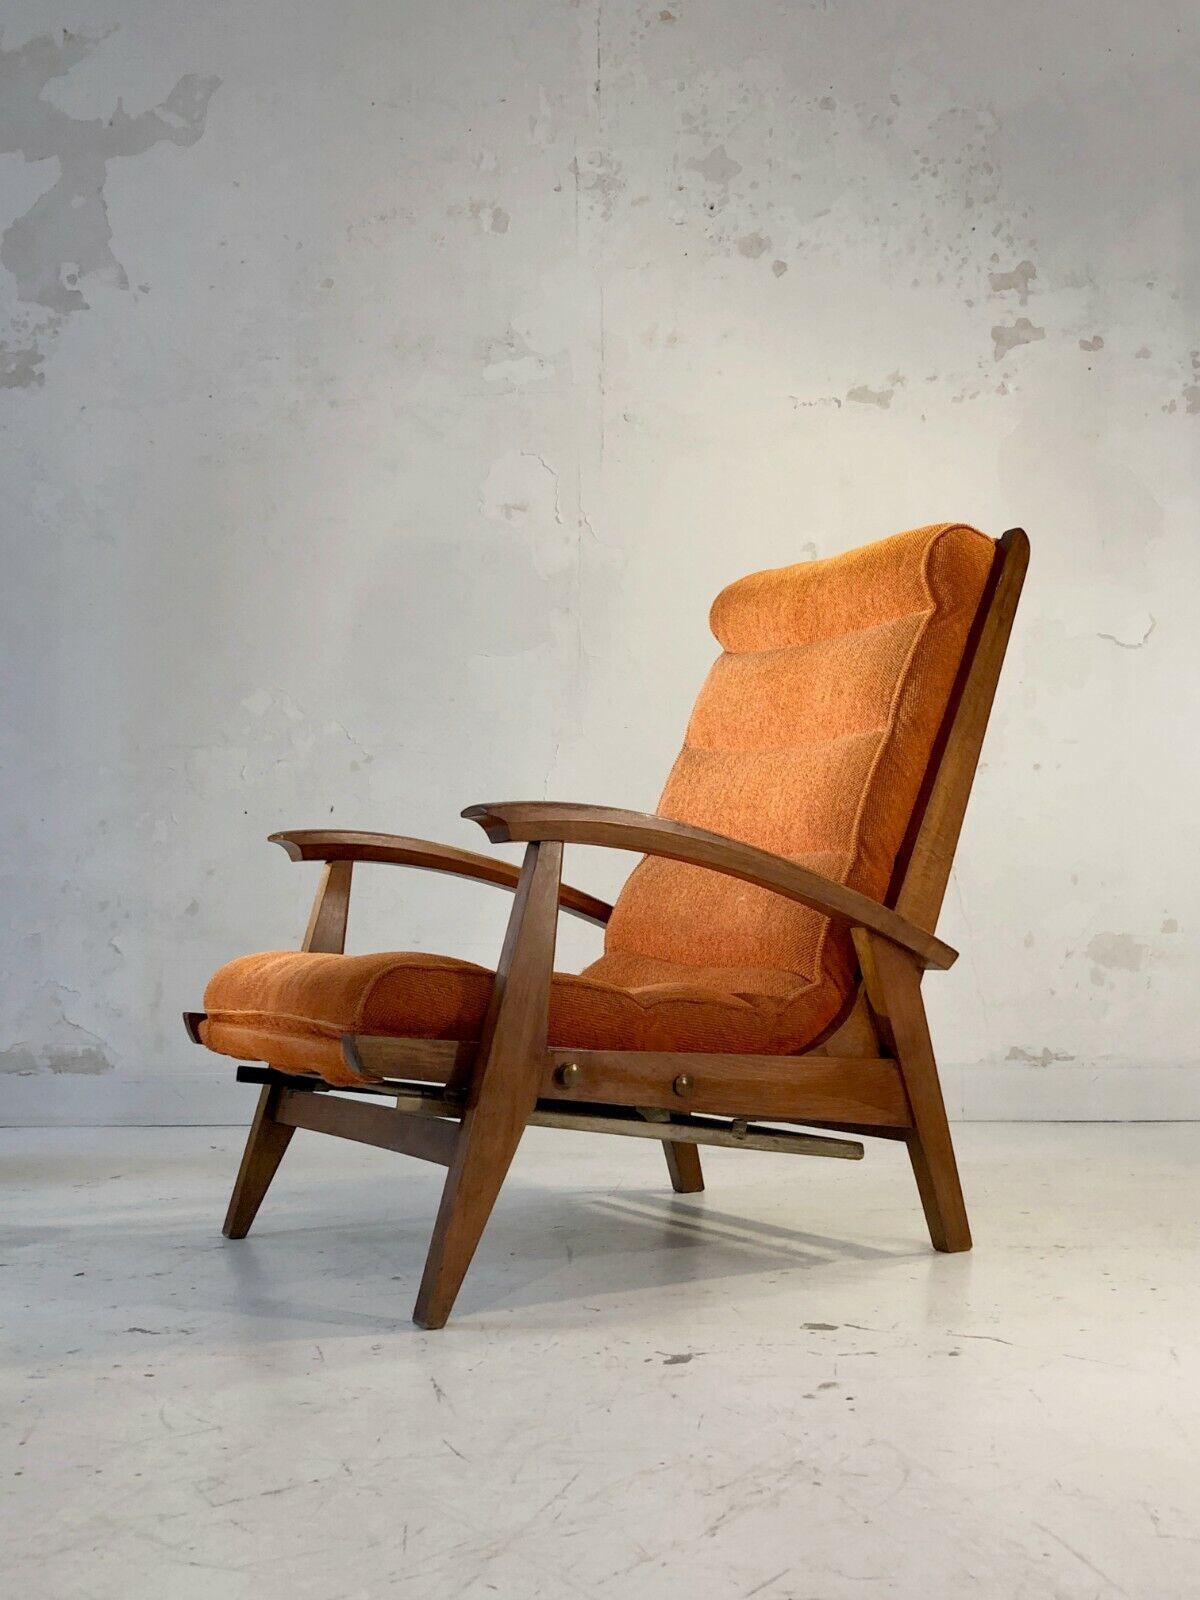 A very comfortable system armchair, Modernist, dynamic solid oak structure and original seat in excellent quality orange fabric, by Guy Besnard, Free-Span edition, France 1950.
A very simple system (2 brass buttons to engage simultaneously) allows